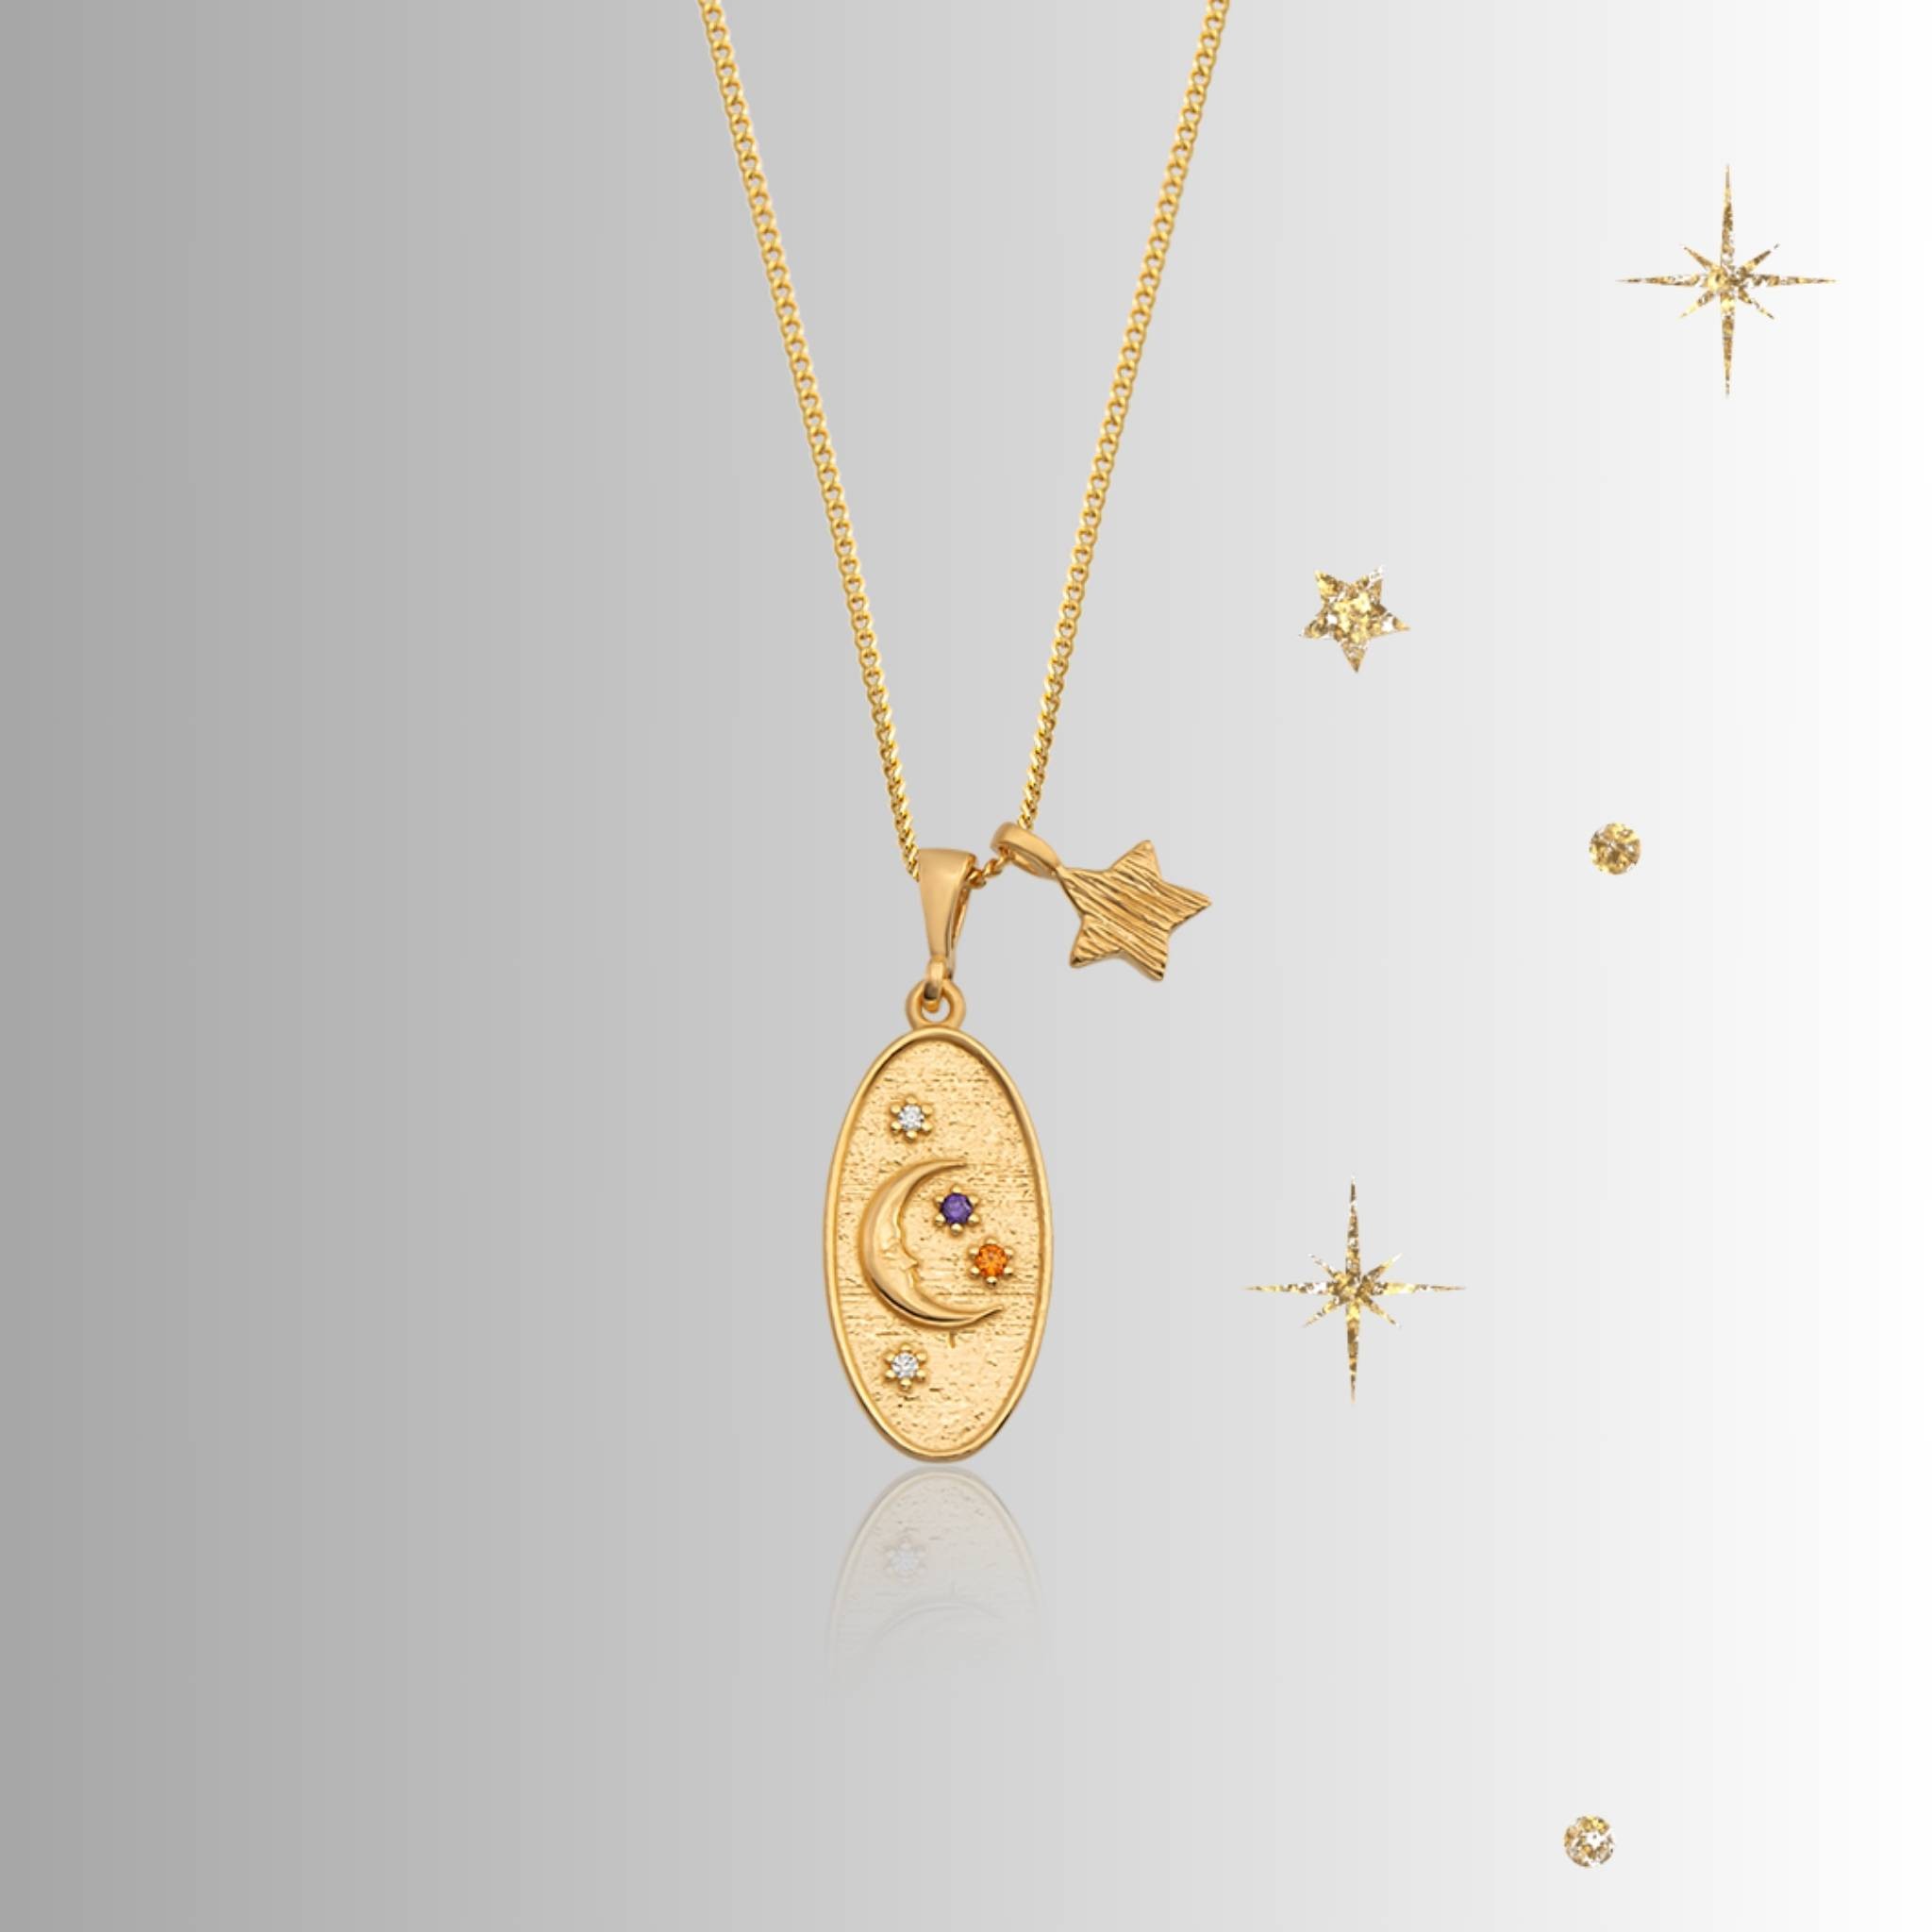 A Starry Night Pendant - Pre Order!